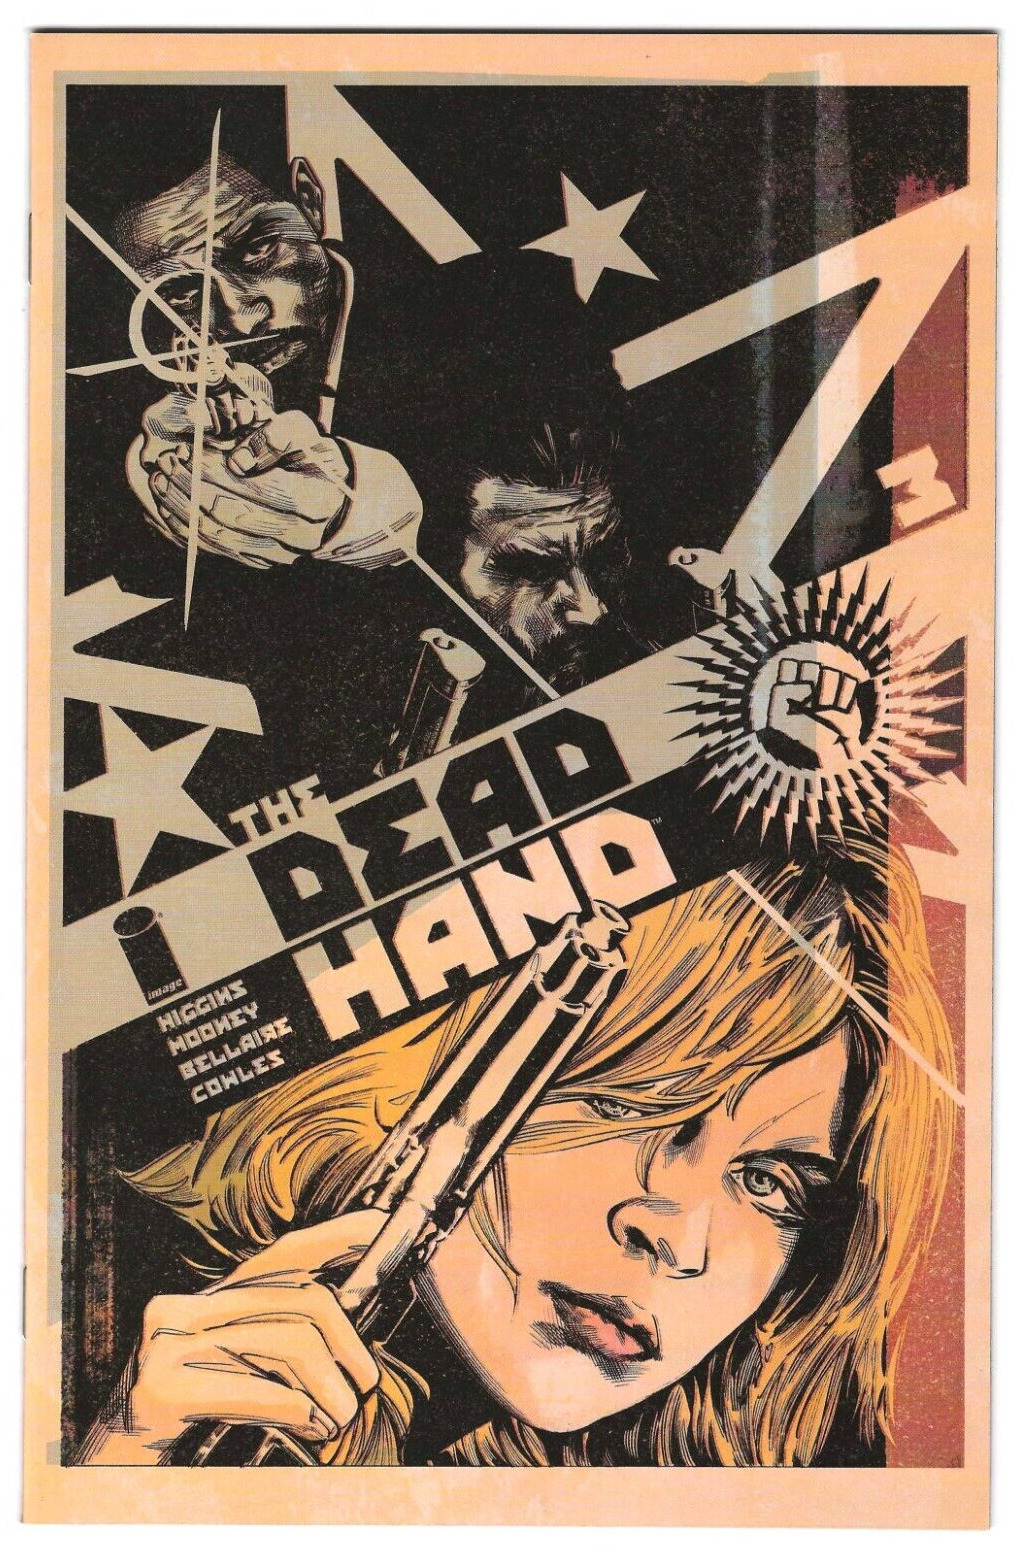 Image Comics THE DEAD HAND #3 first printing cover A